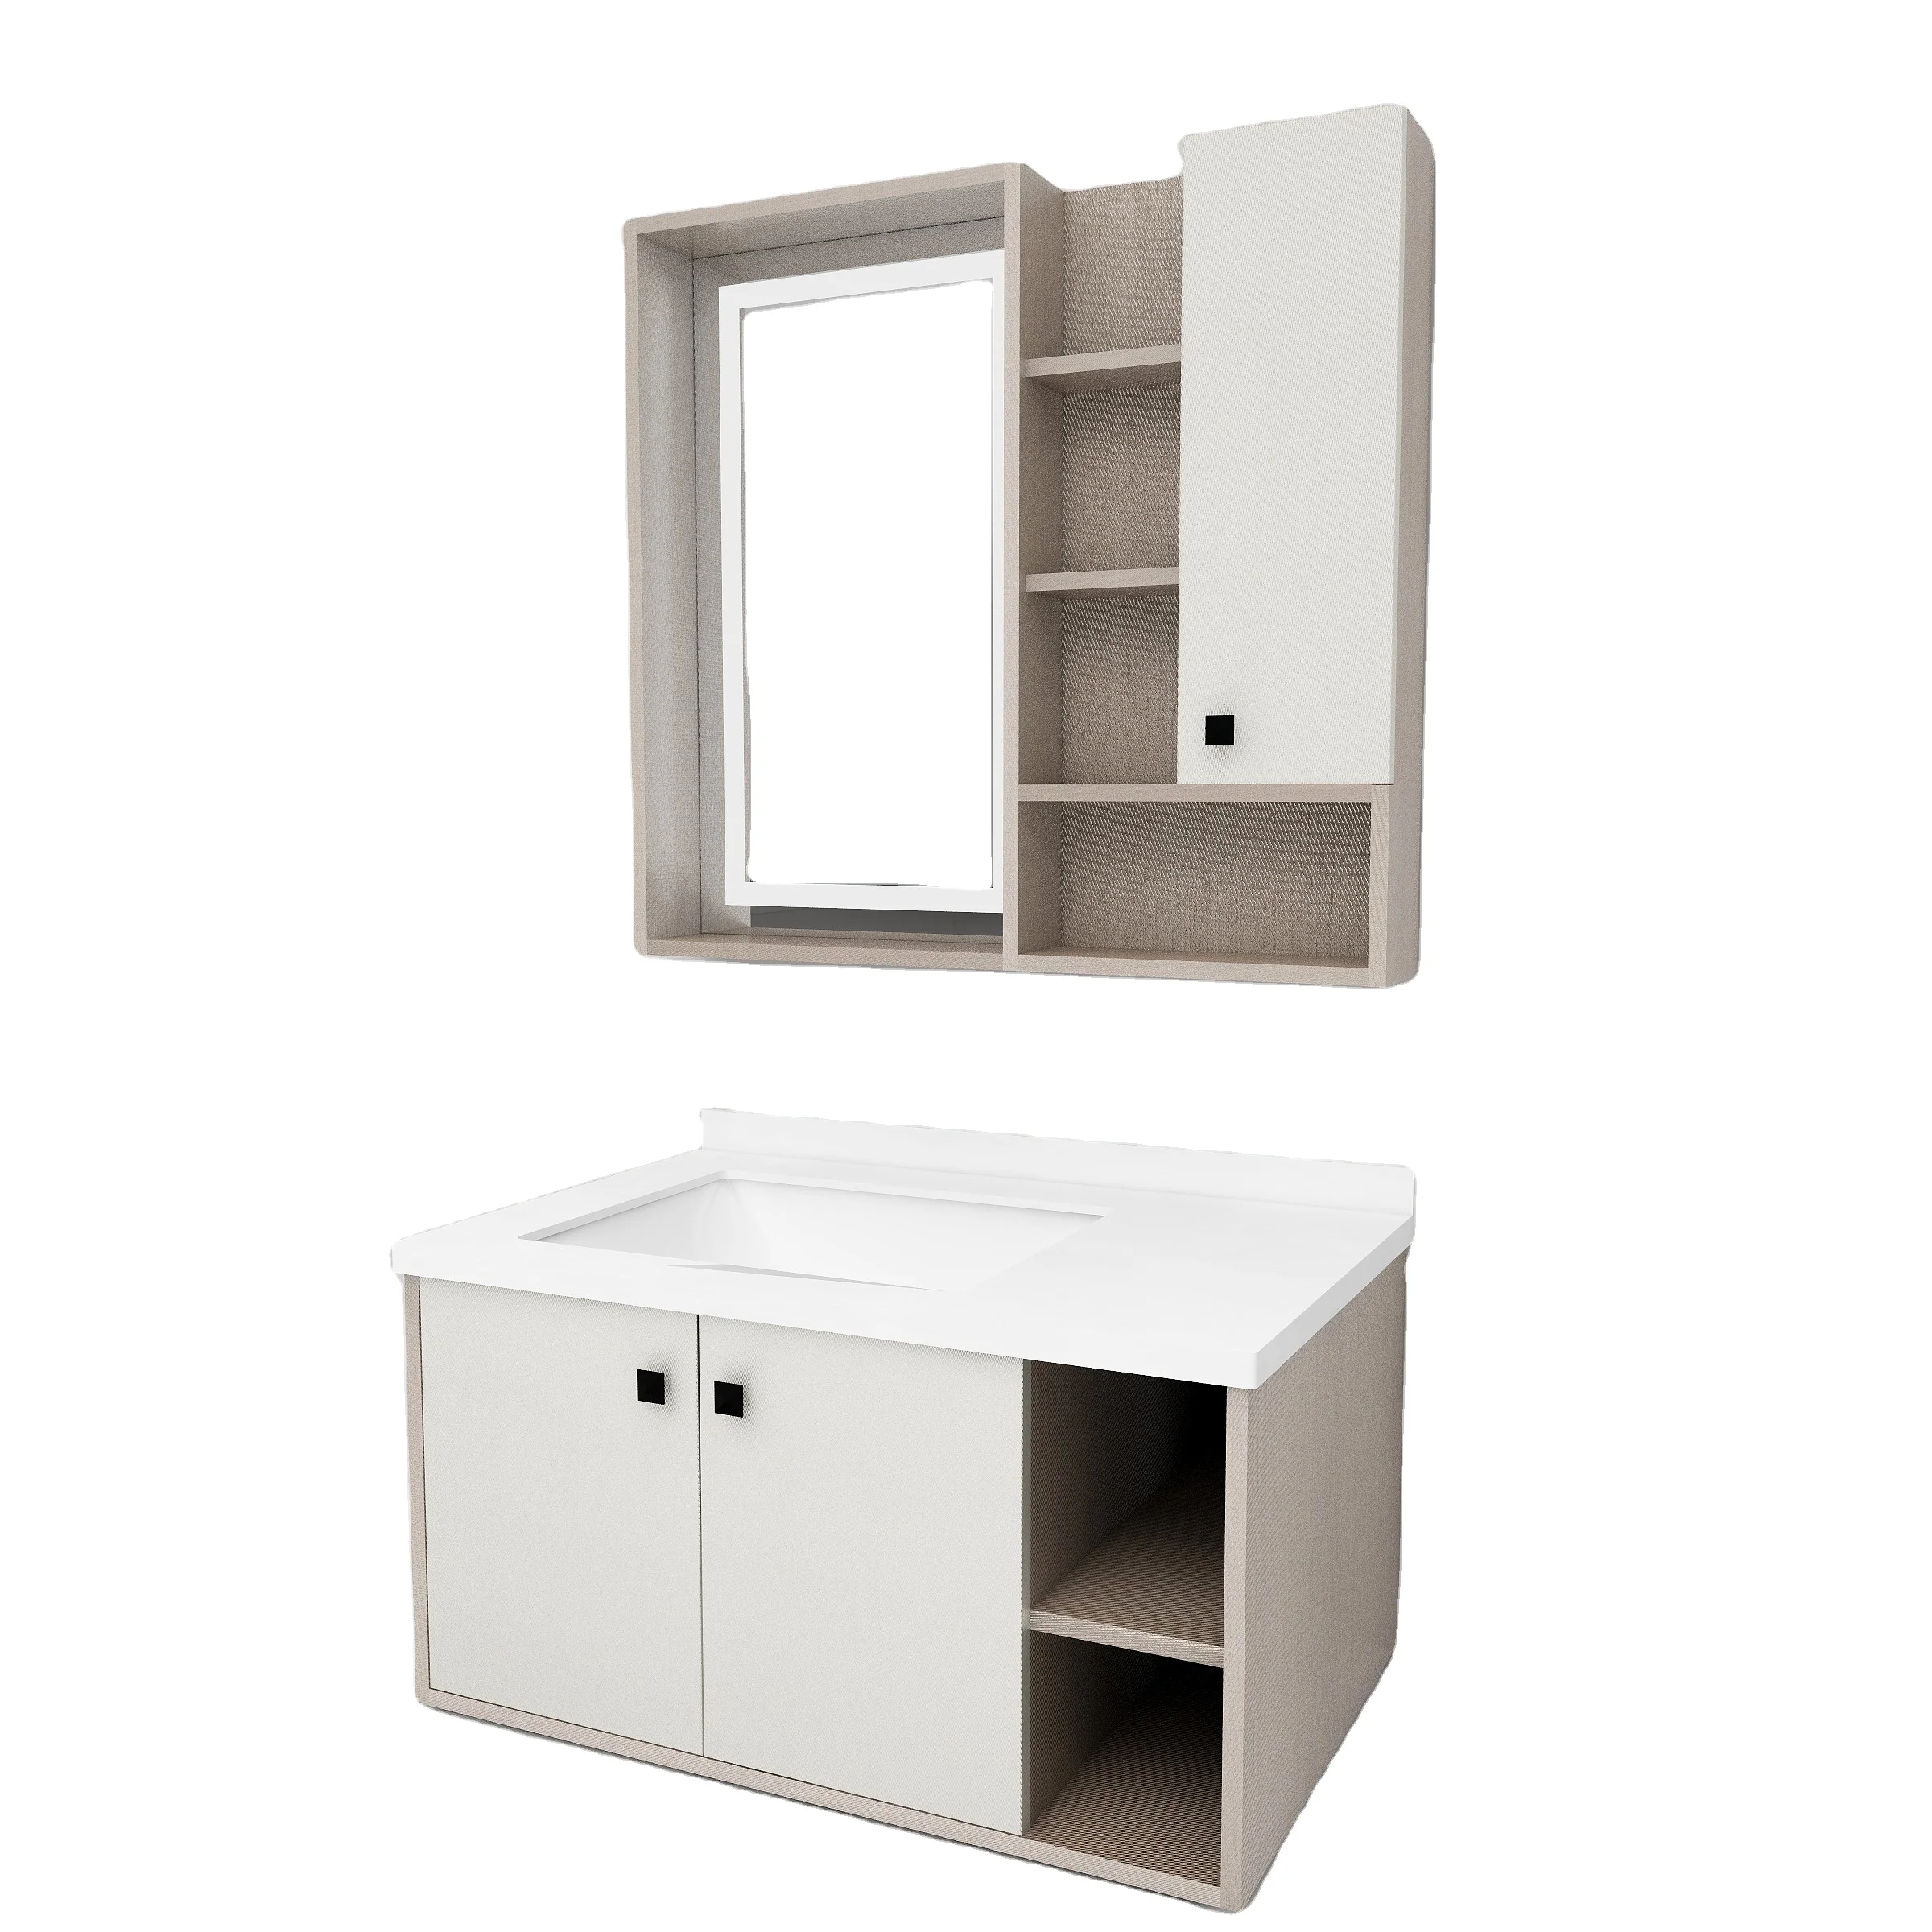 High Quality French Style White Color Washing Machine Solid Oak Bathroom Cabinet Buy White Color Washing Machine